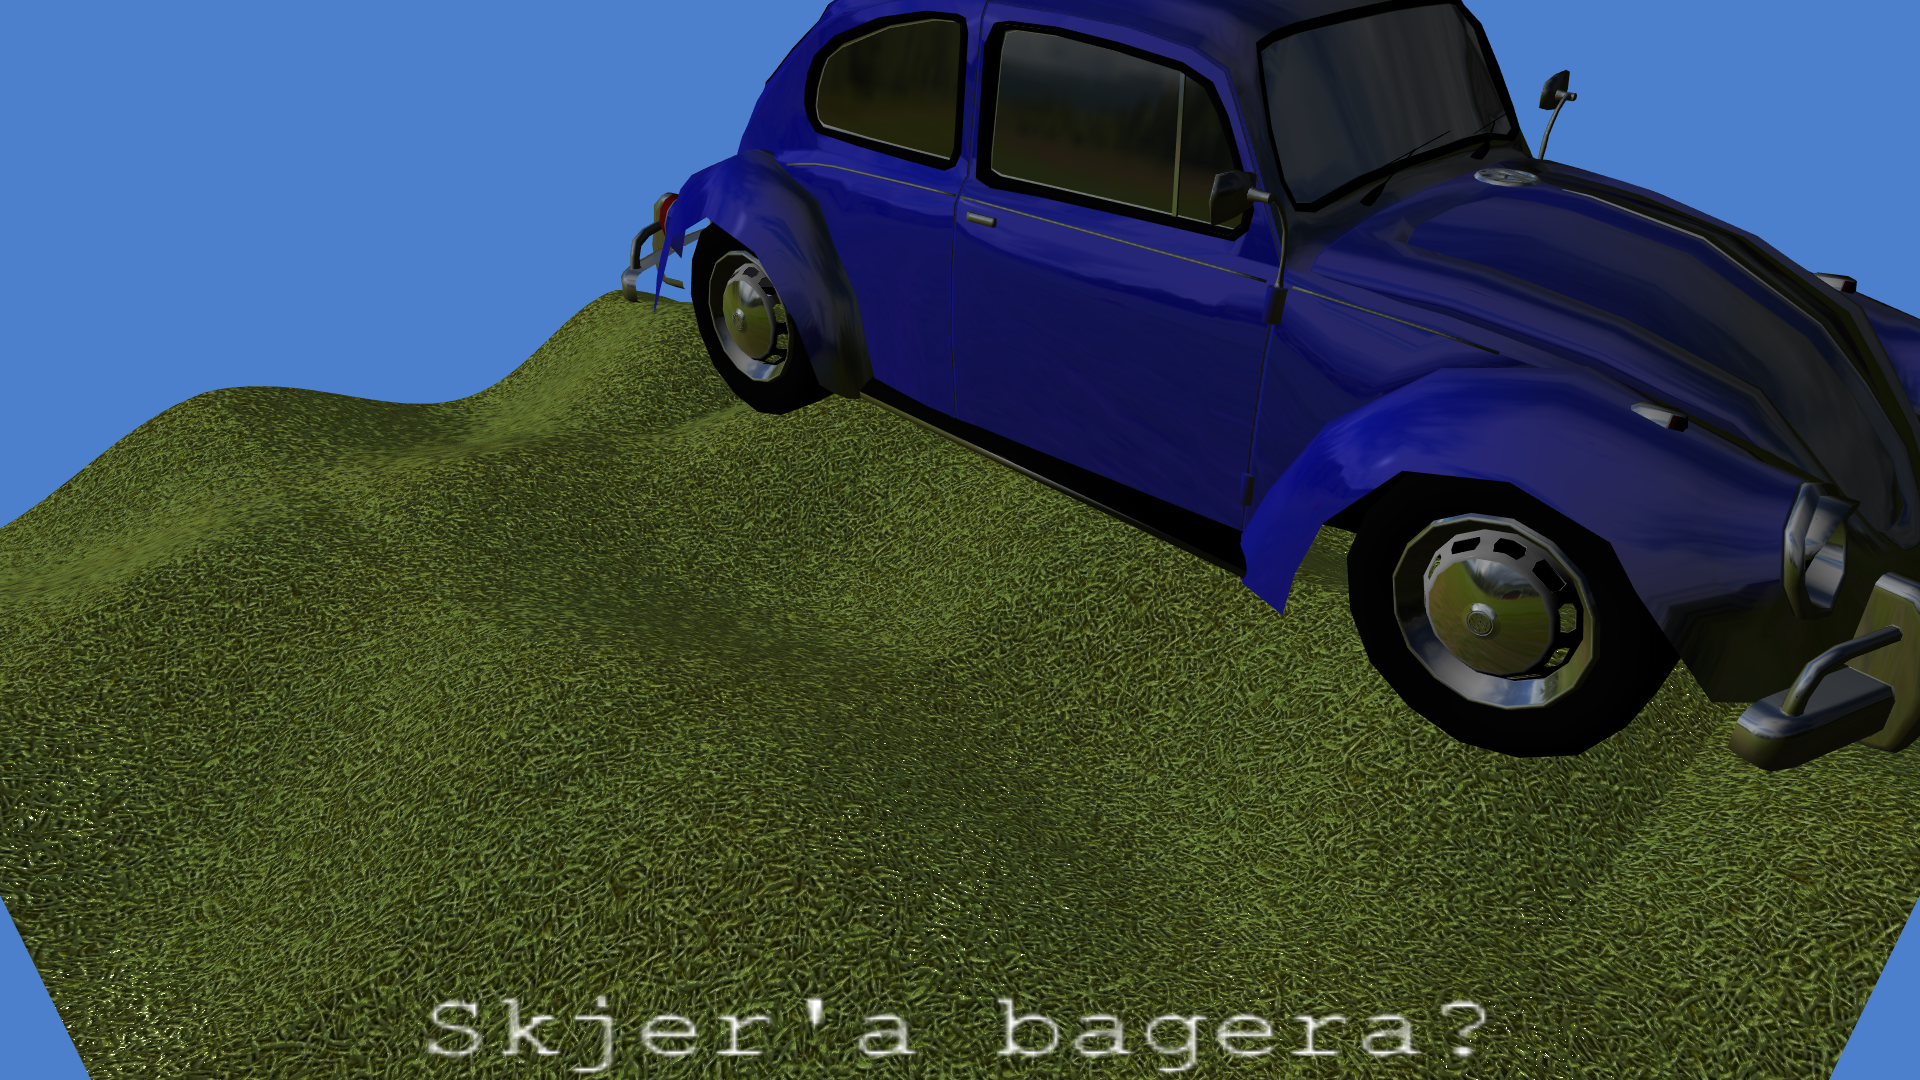 Car model with all colors, with reflection mapping applied.